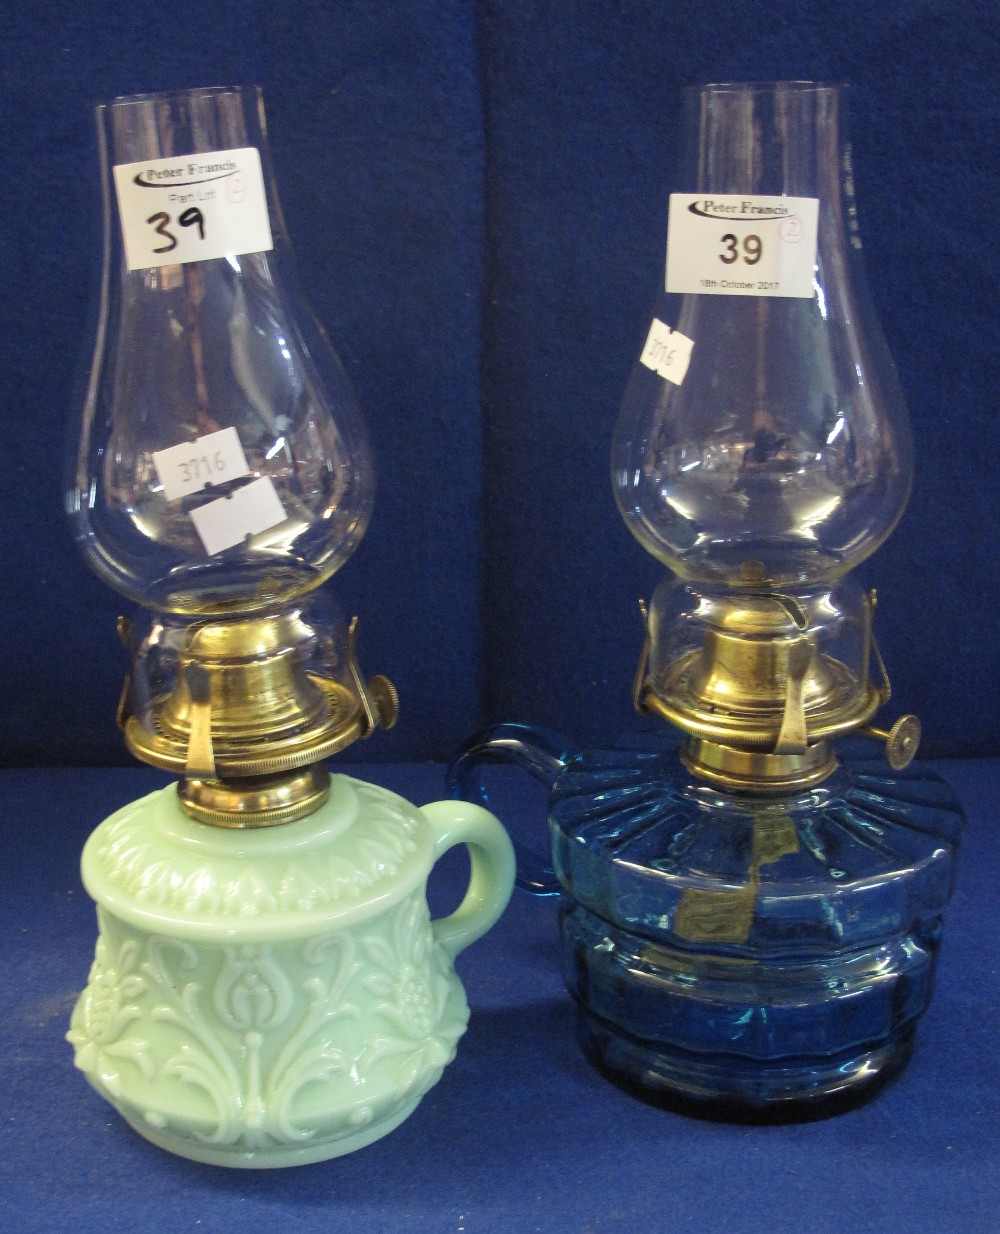 Two similar single oil burner chamber stick lamps, one blue glass, the other green slag type glass.